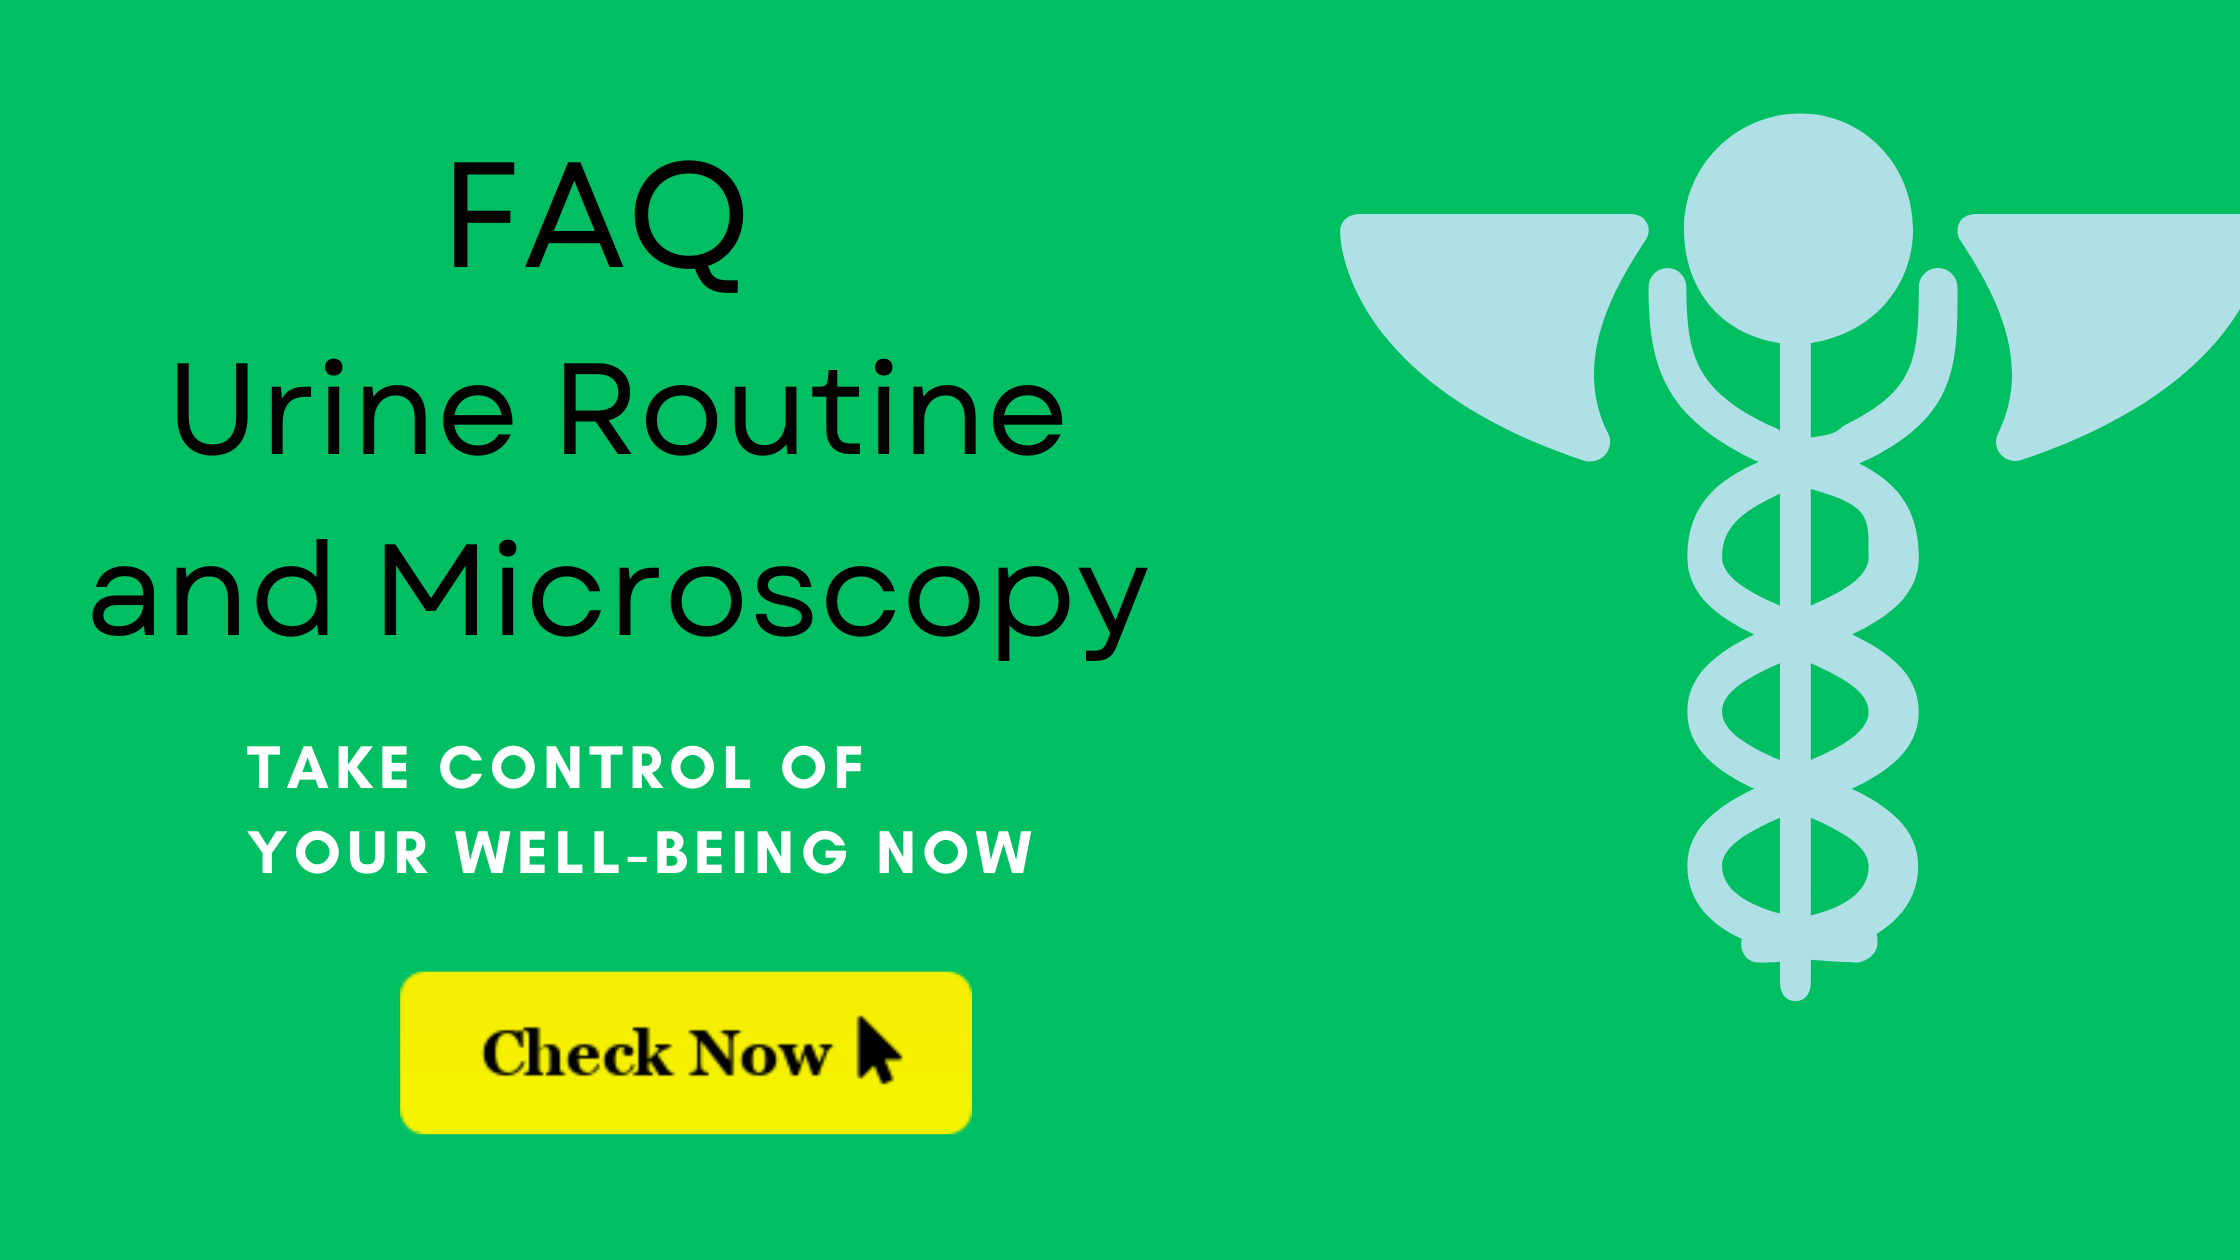 FAQs About Urine Routine and Microscopy